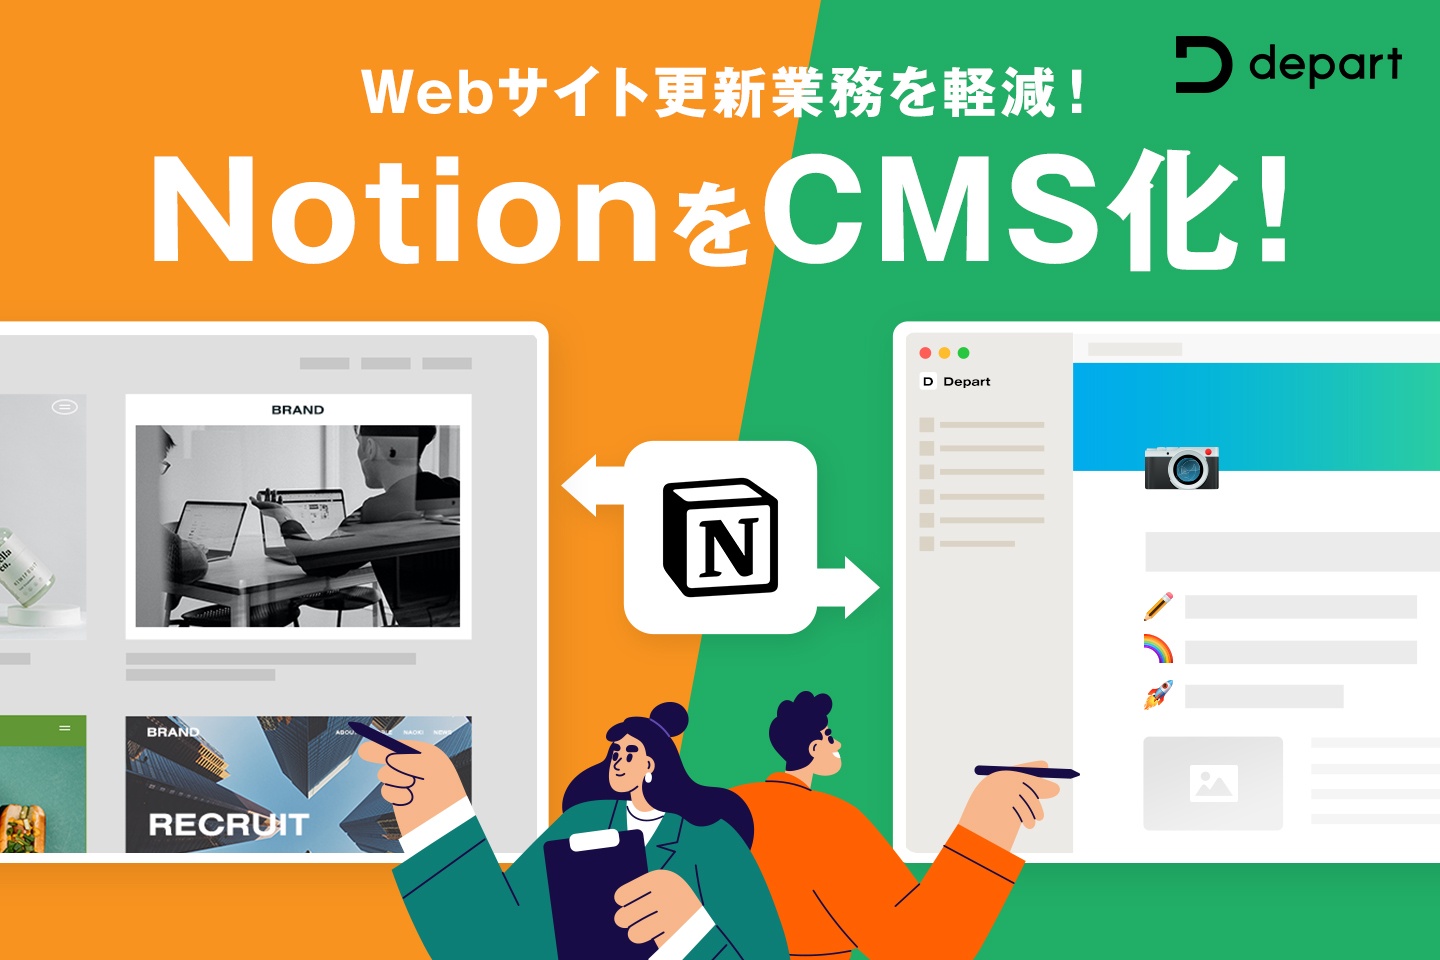 NotionをCMS化！？Webサイト更新業務が軽減するかも！